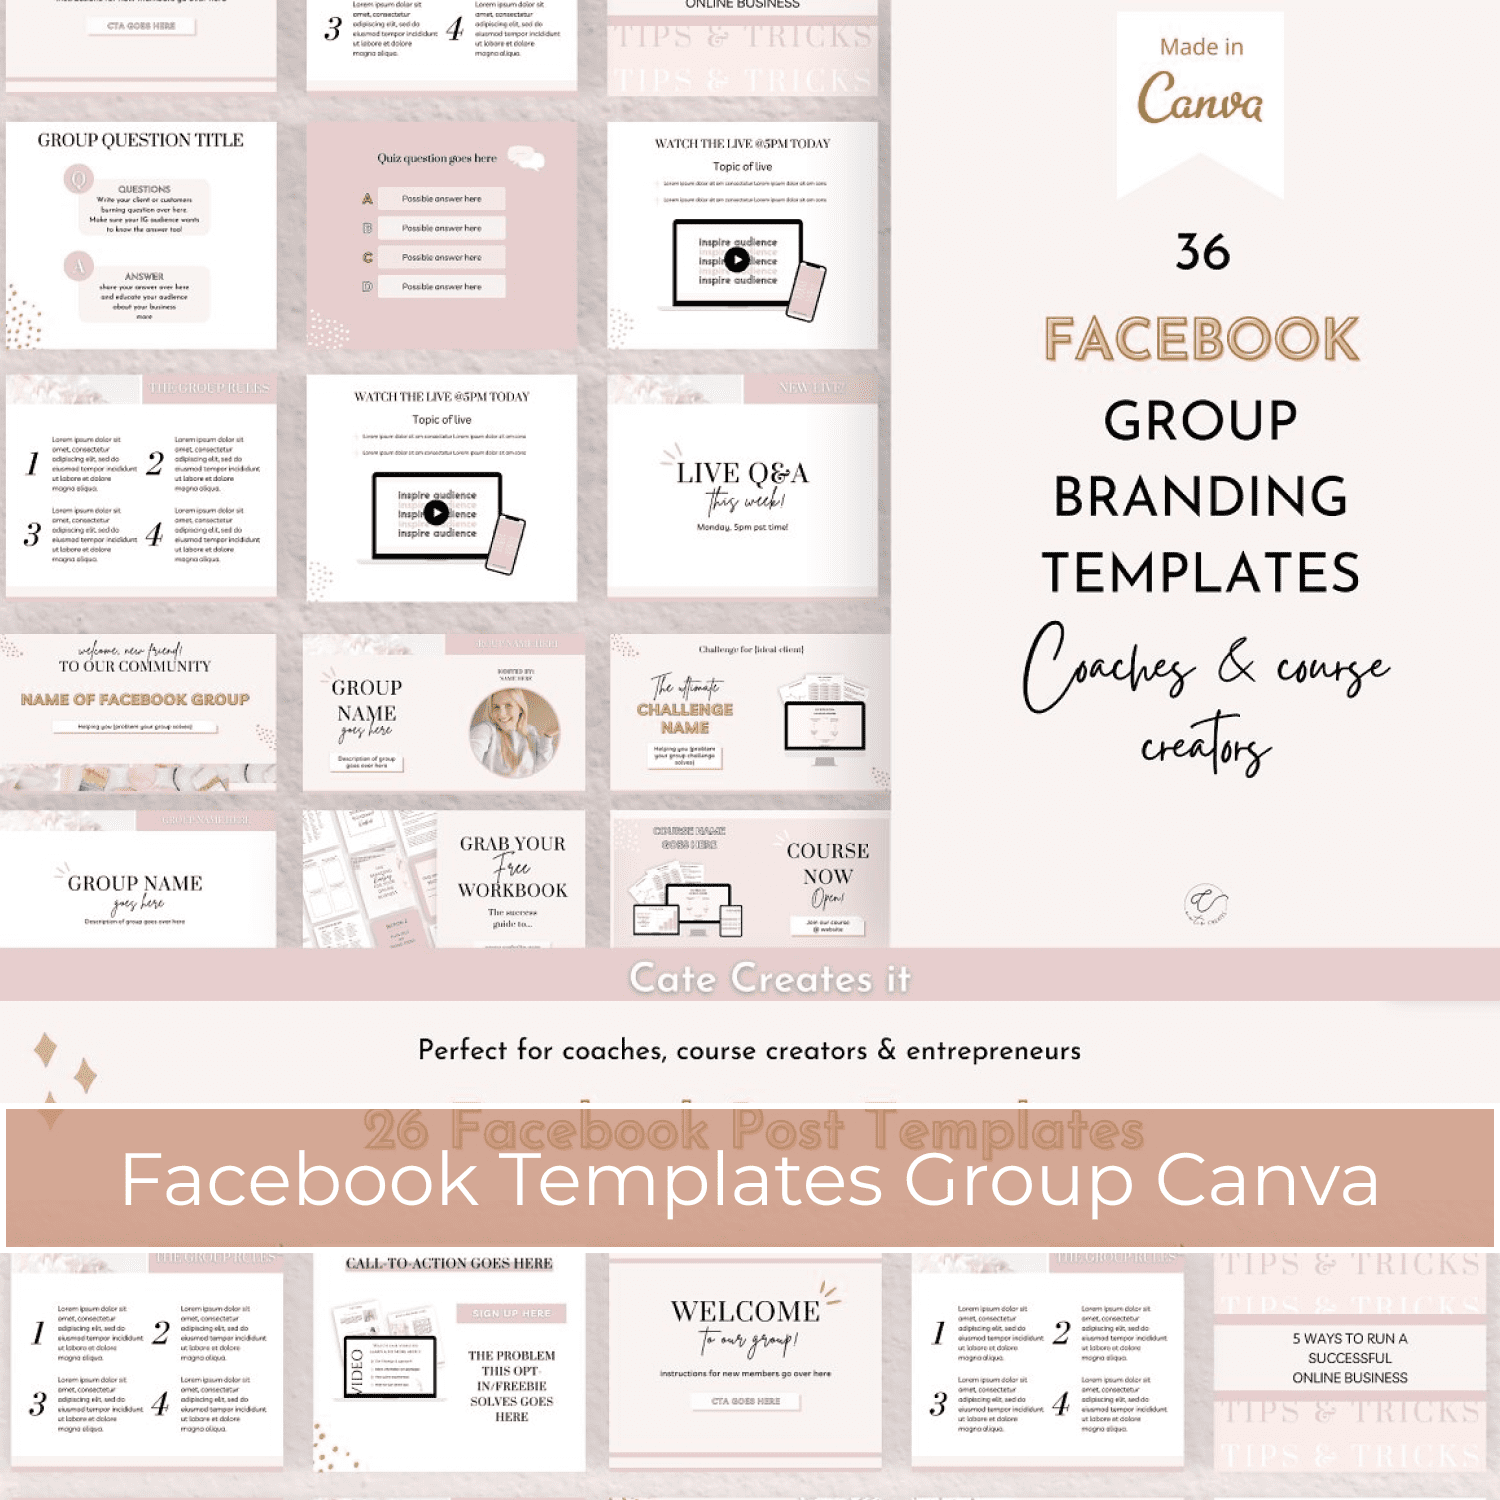 Facebook Templates Group Canva cover image.